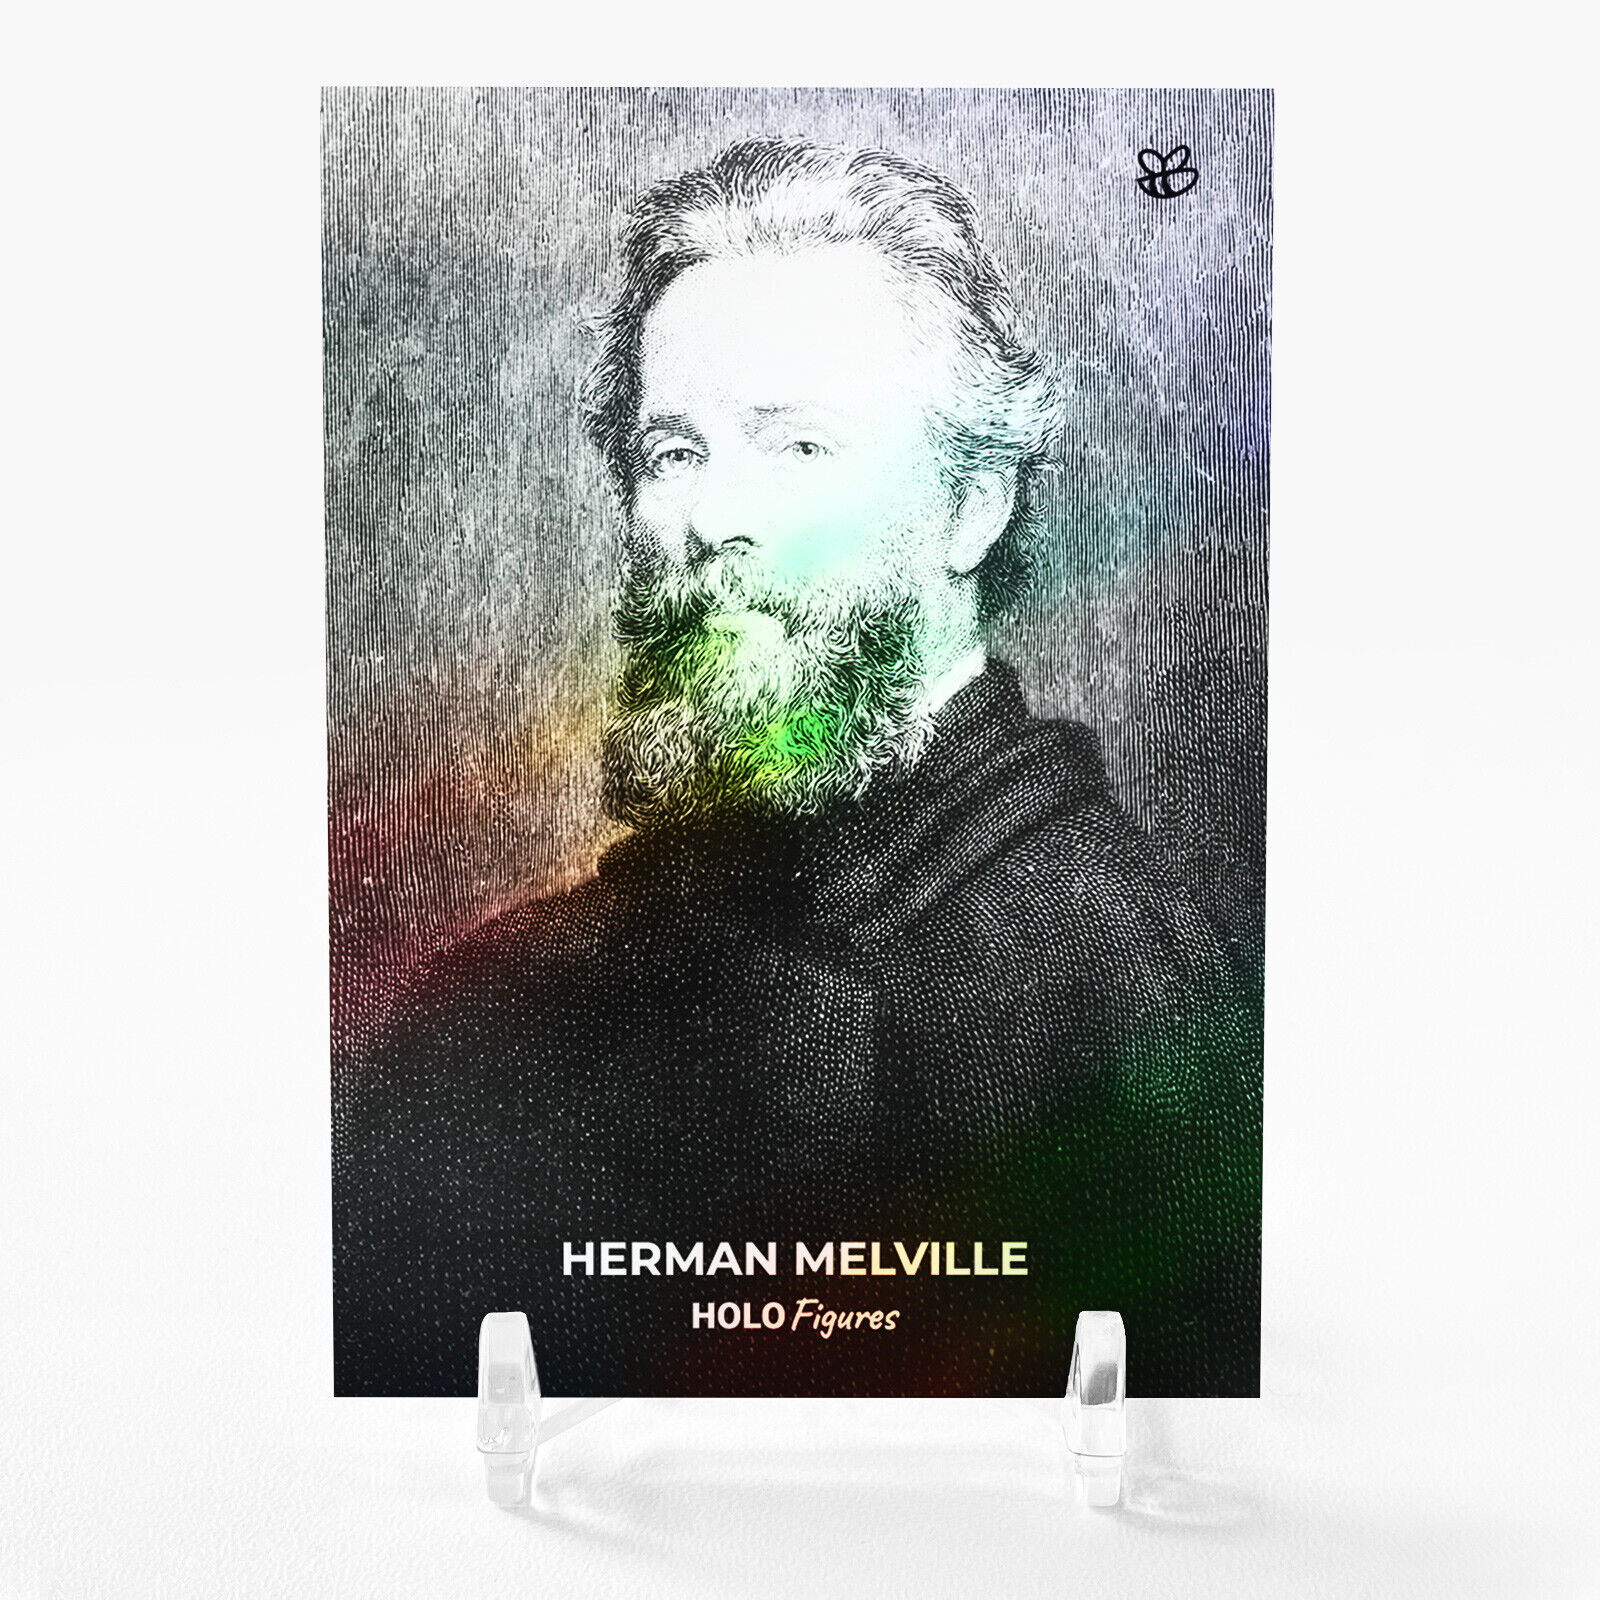 HERMAN MELVILLE Author of Moby Dick Art Card Holo Figures GBC #HA1B VERY SPECIAL